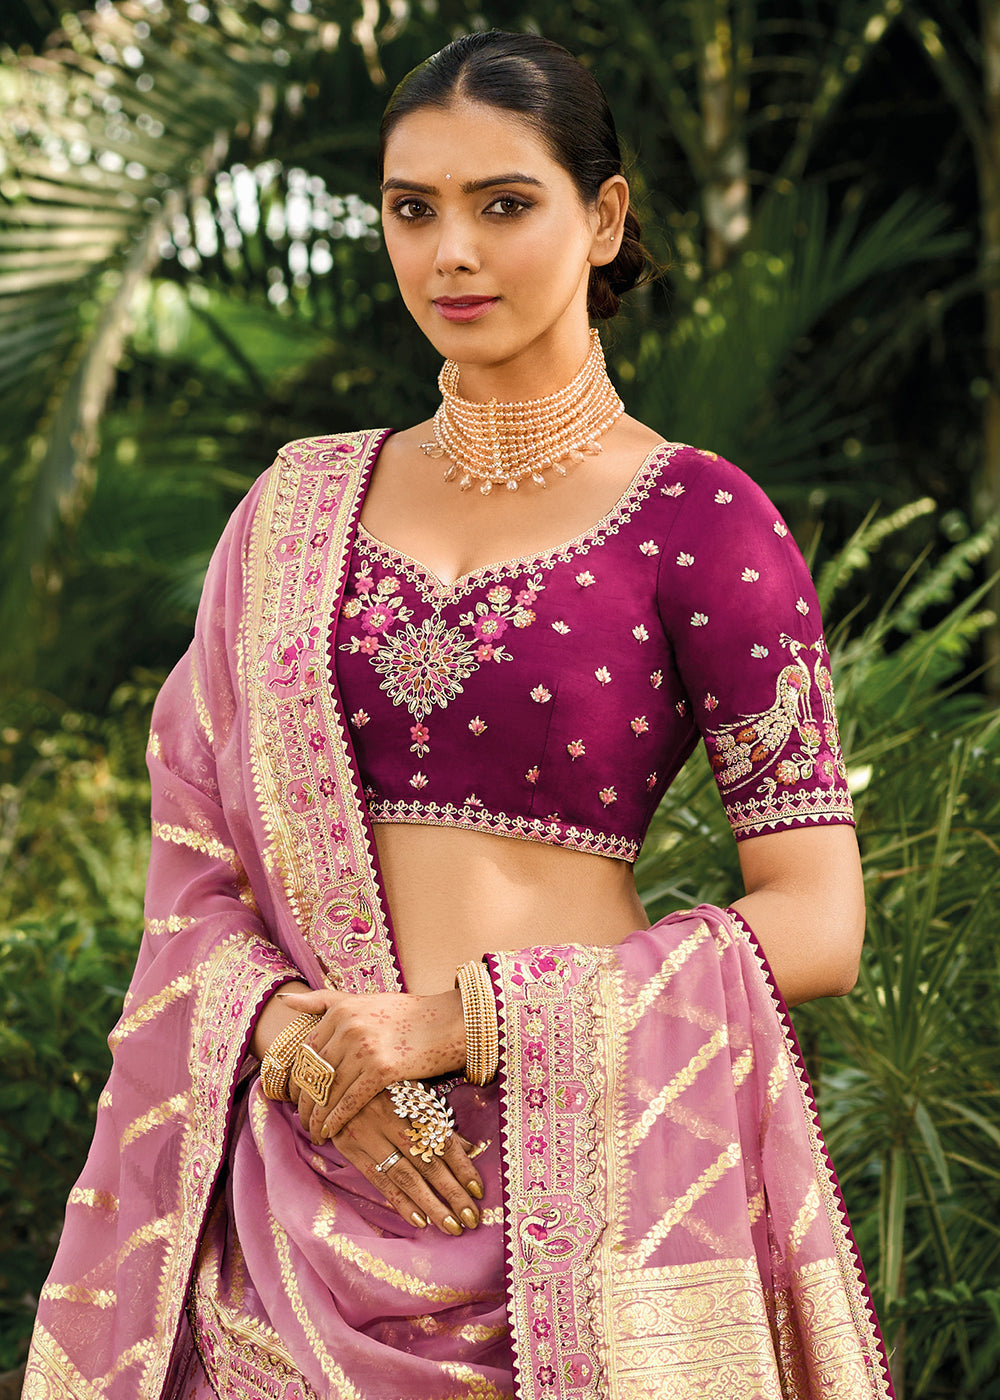 Shades Of Purple Crepe Georgette Lehenga with Embroidery, Thread work & Jacquard Butti all over